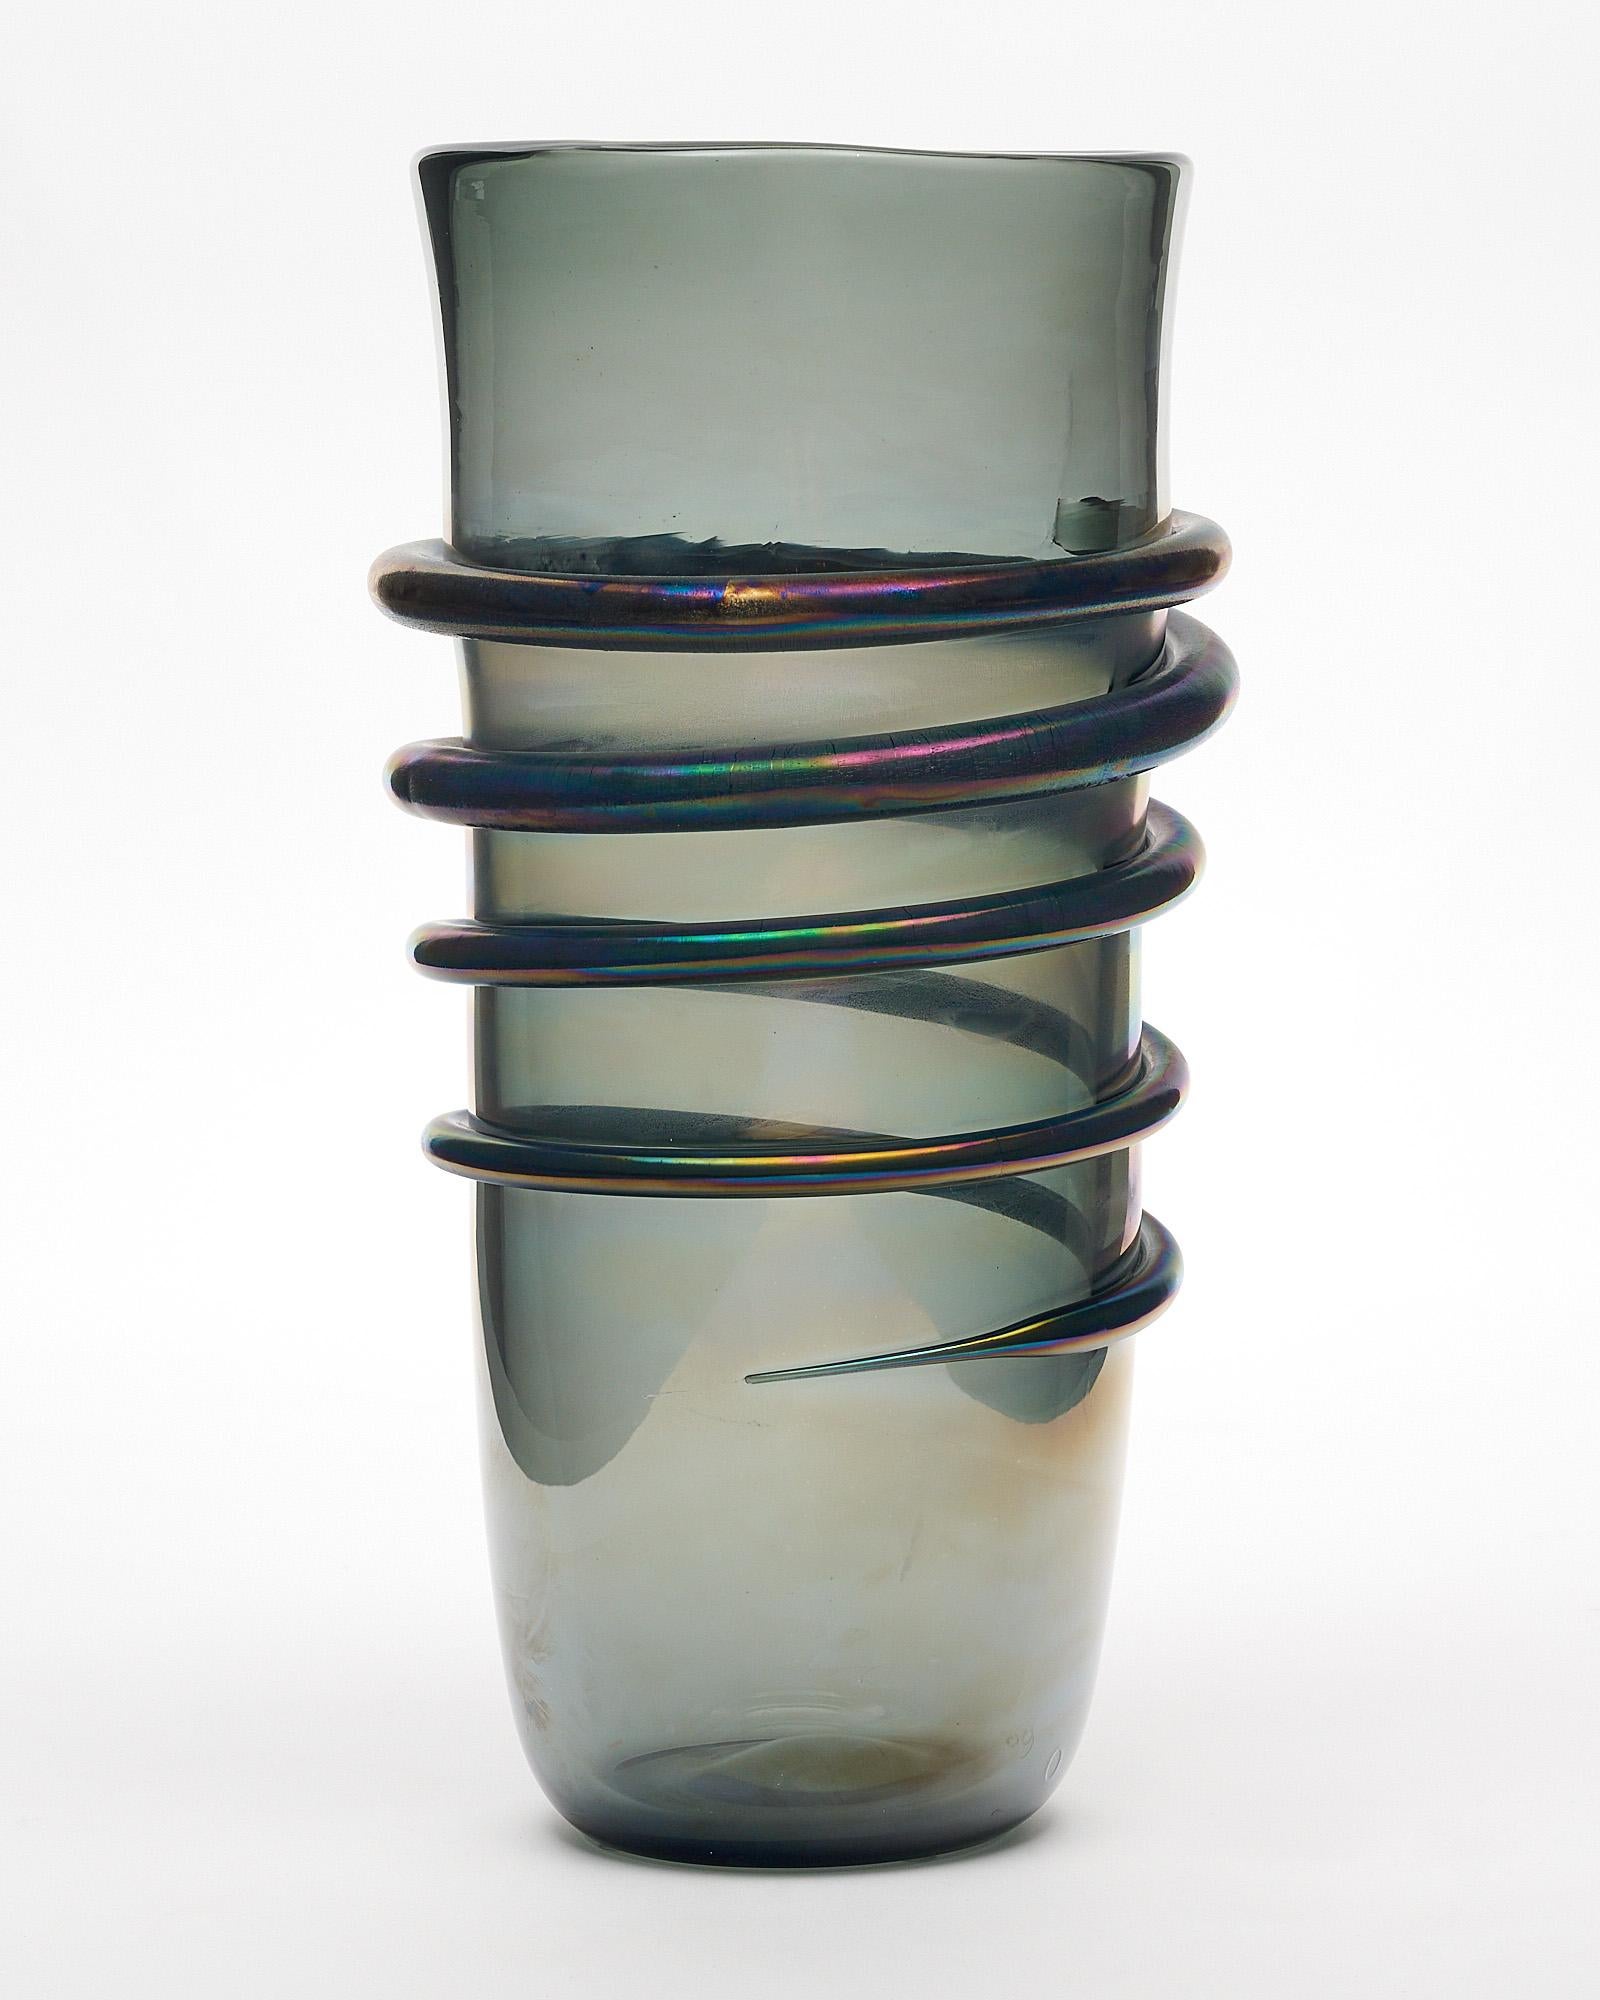 Murano glass vase made of hand-blown glass on the island off of Venice. This piece features dark smoked glass with an iridescent finish and hand-crafted “linee” or line wrapping around to create a spiral effect. We have two available; though they